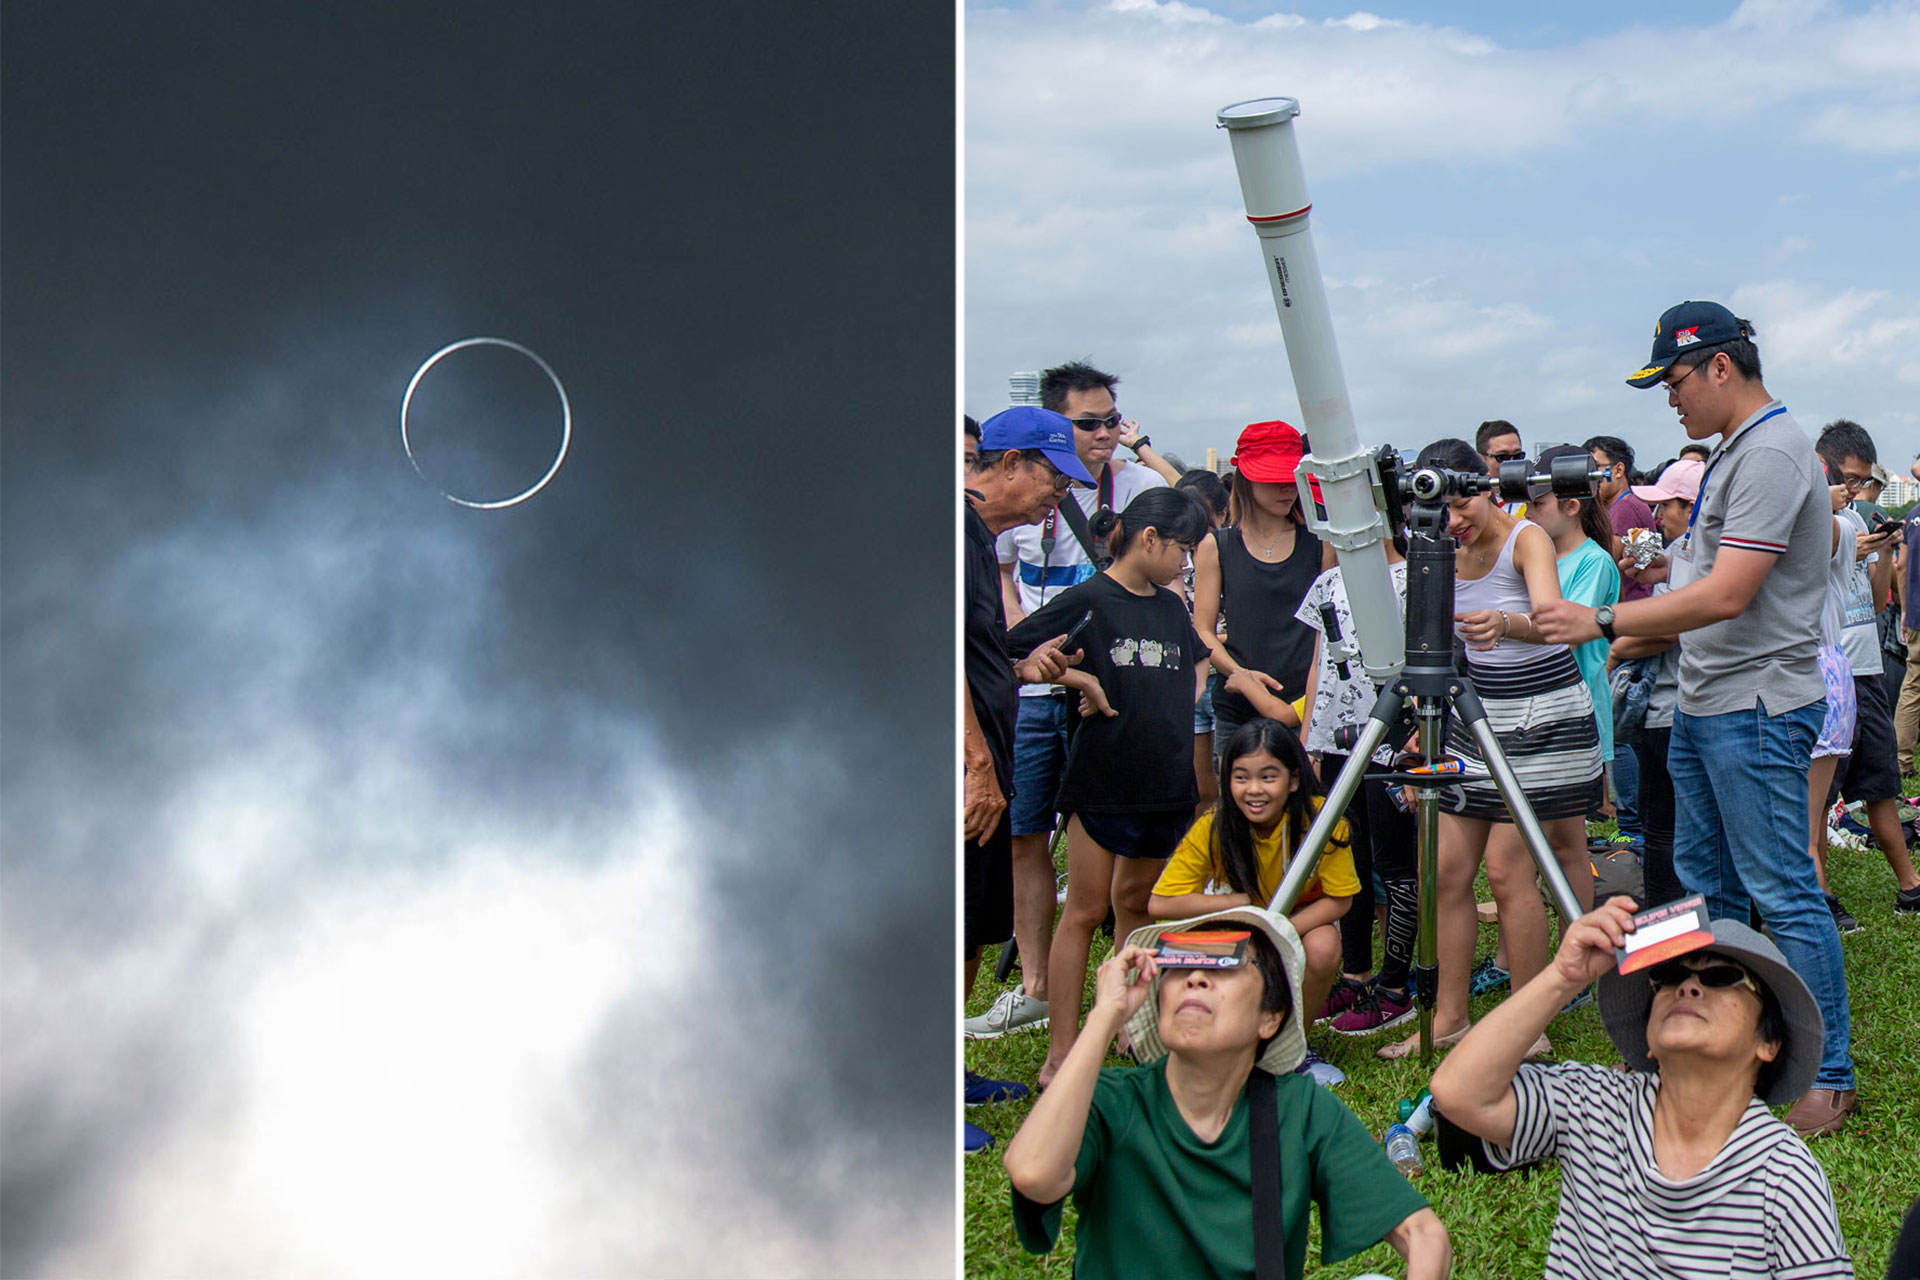 Thousands in Singapore dazzled by rare solar eclipse